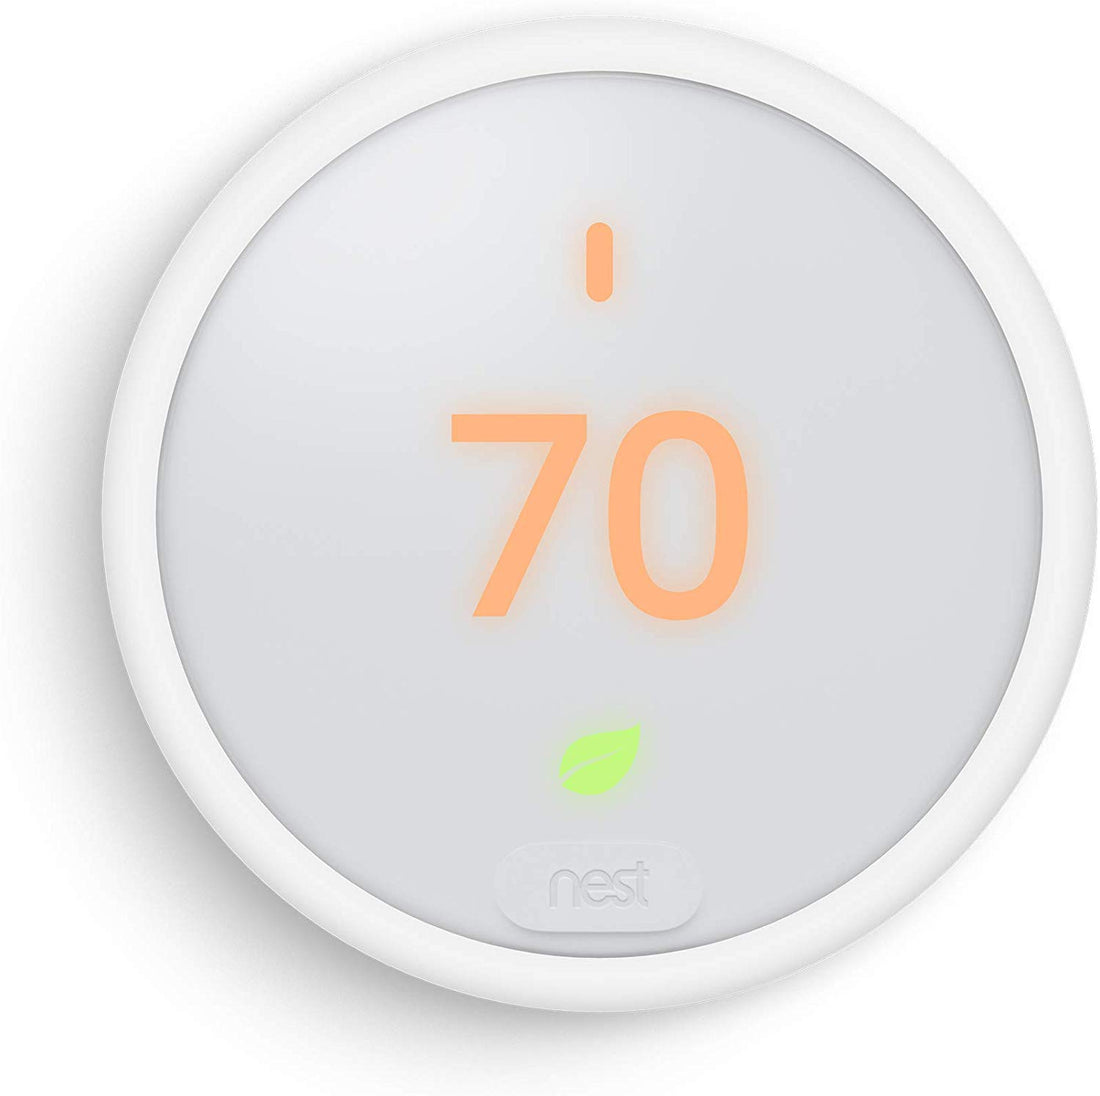 Google - Nest Thermostat E, Smart Thermostat, T4000ES - White (Certified Refurbished)